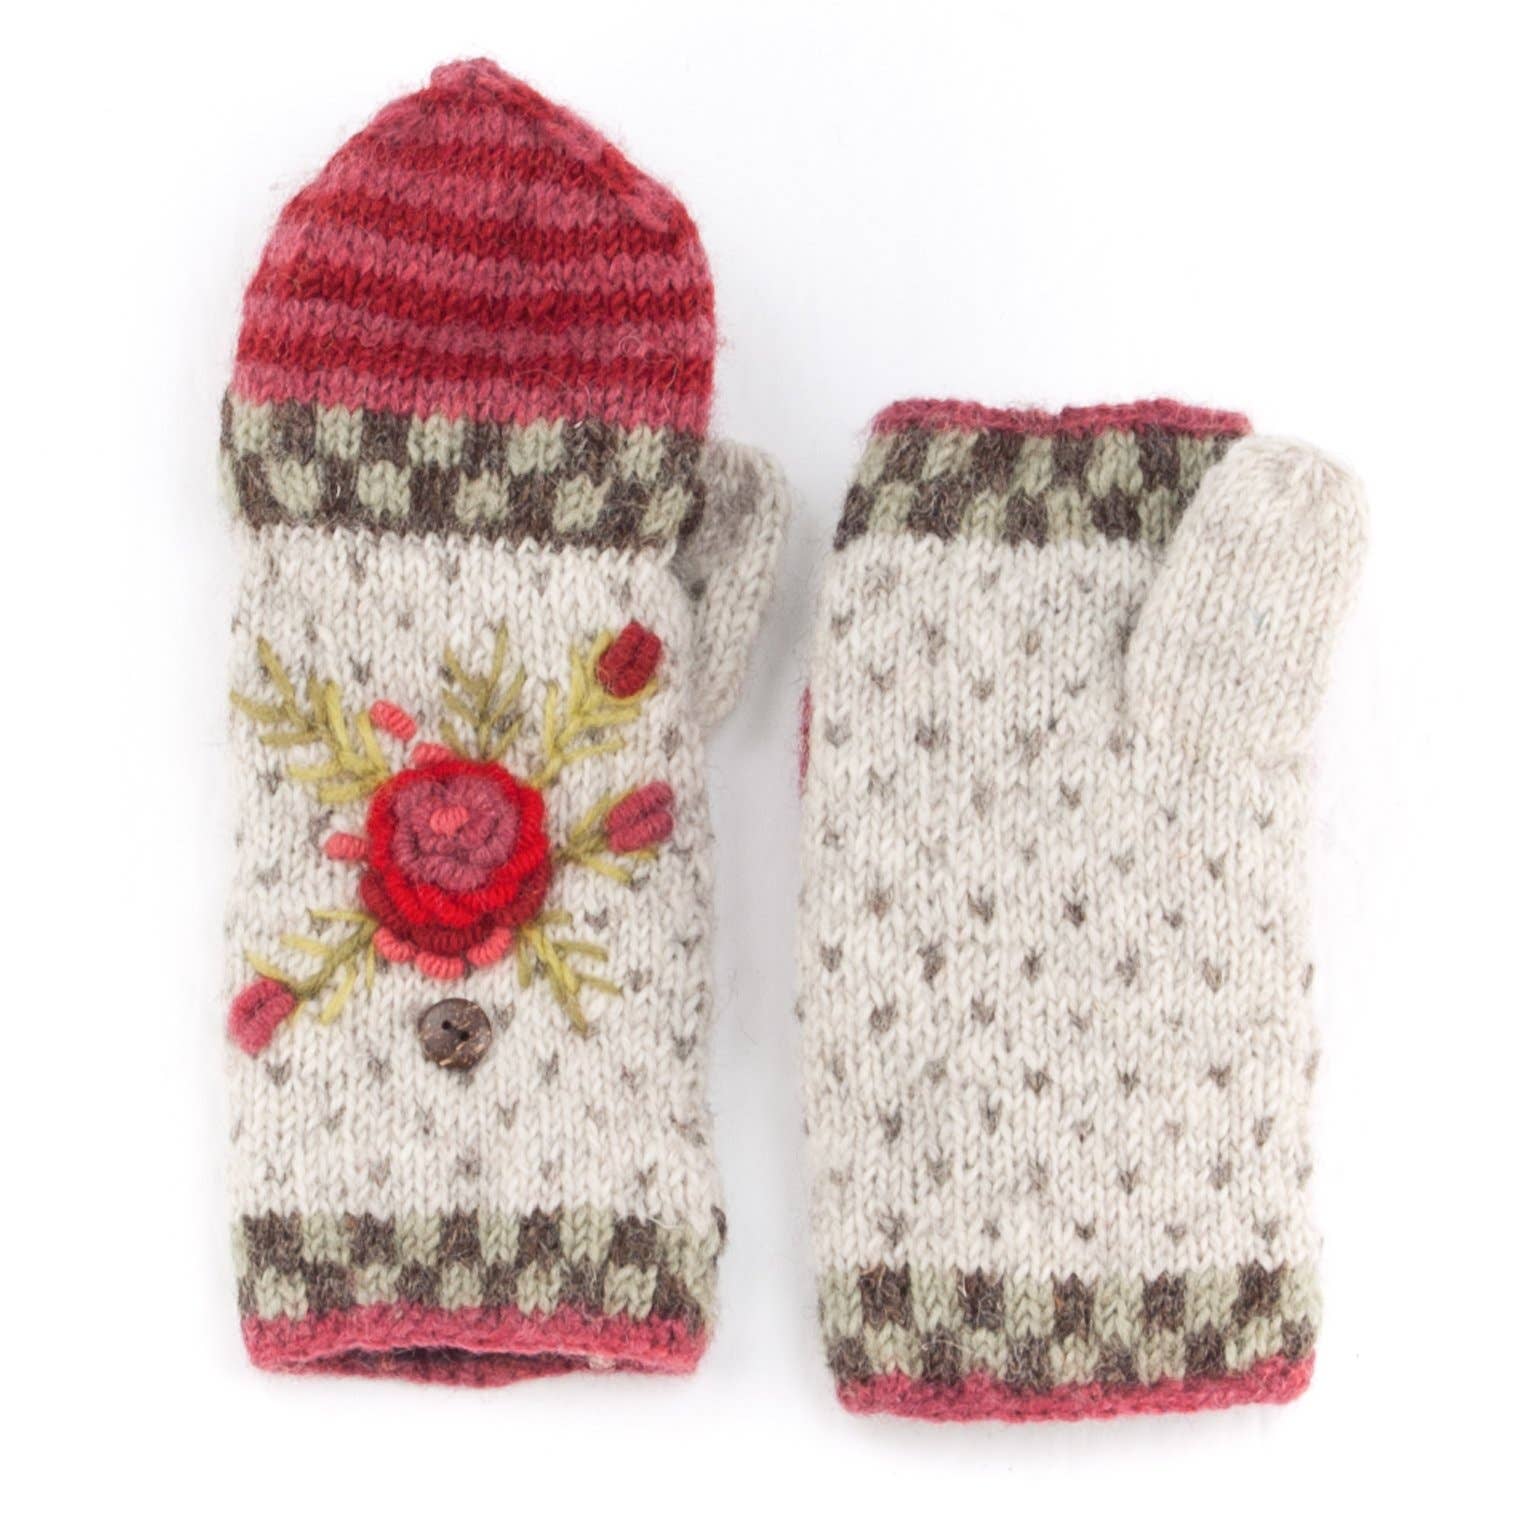 Aubrey  - women's wool knit handwarmers - Out of the Blue